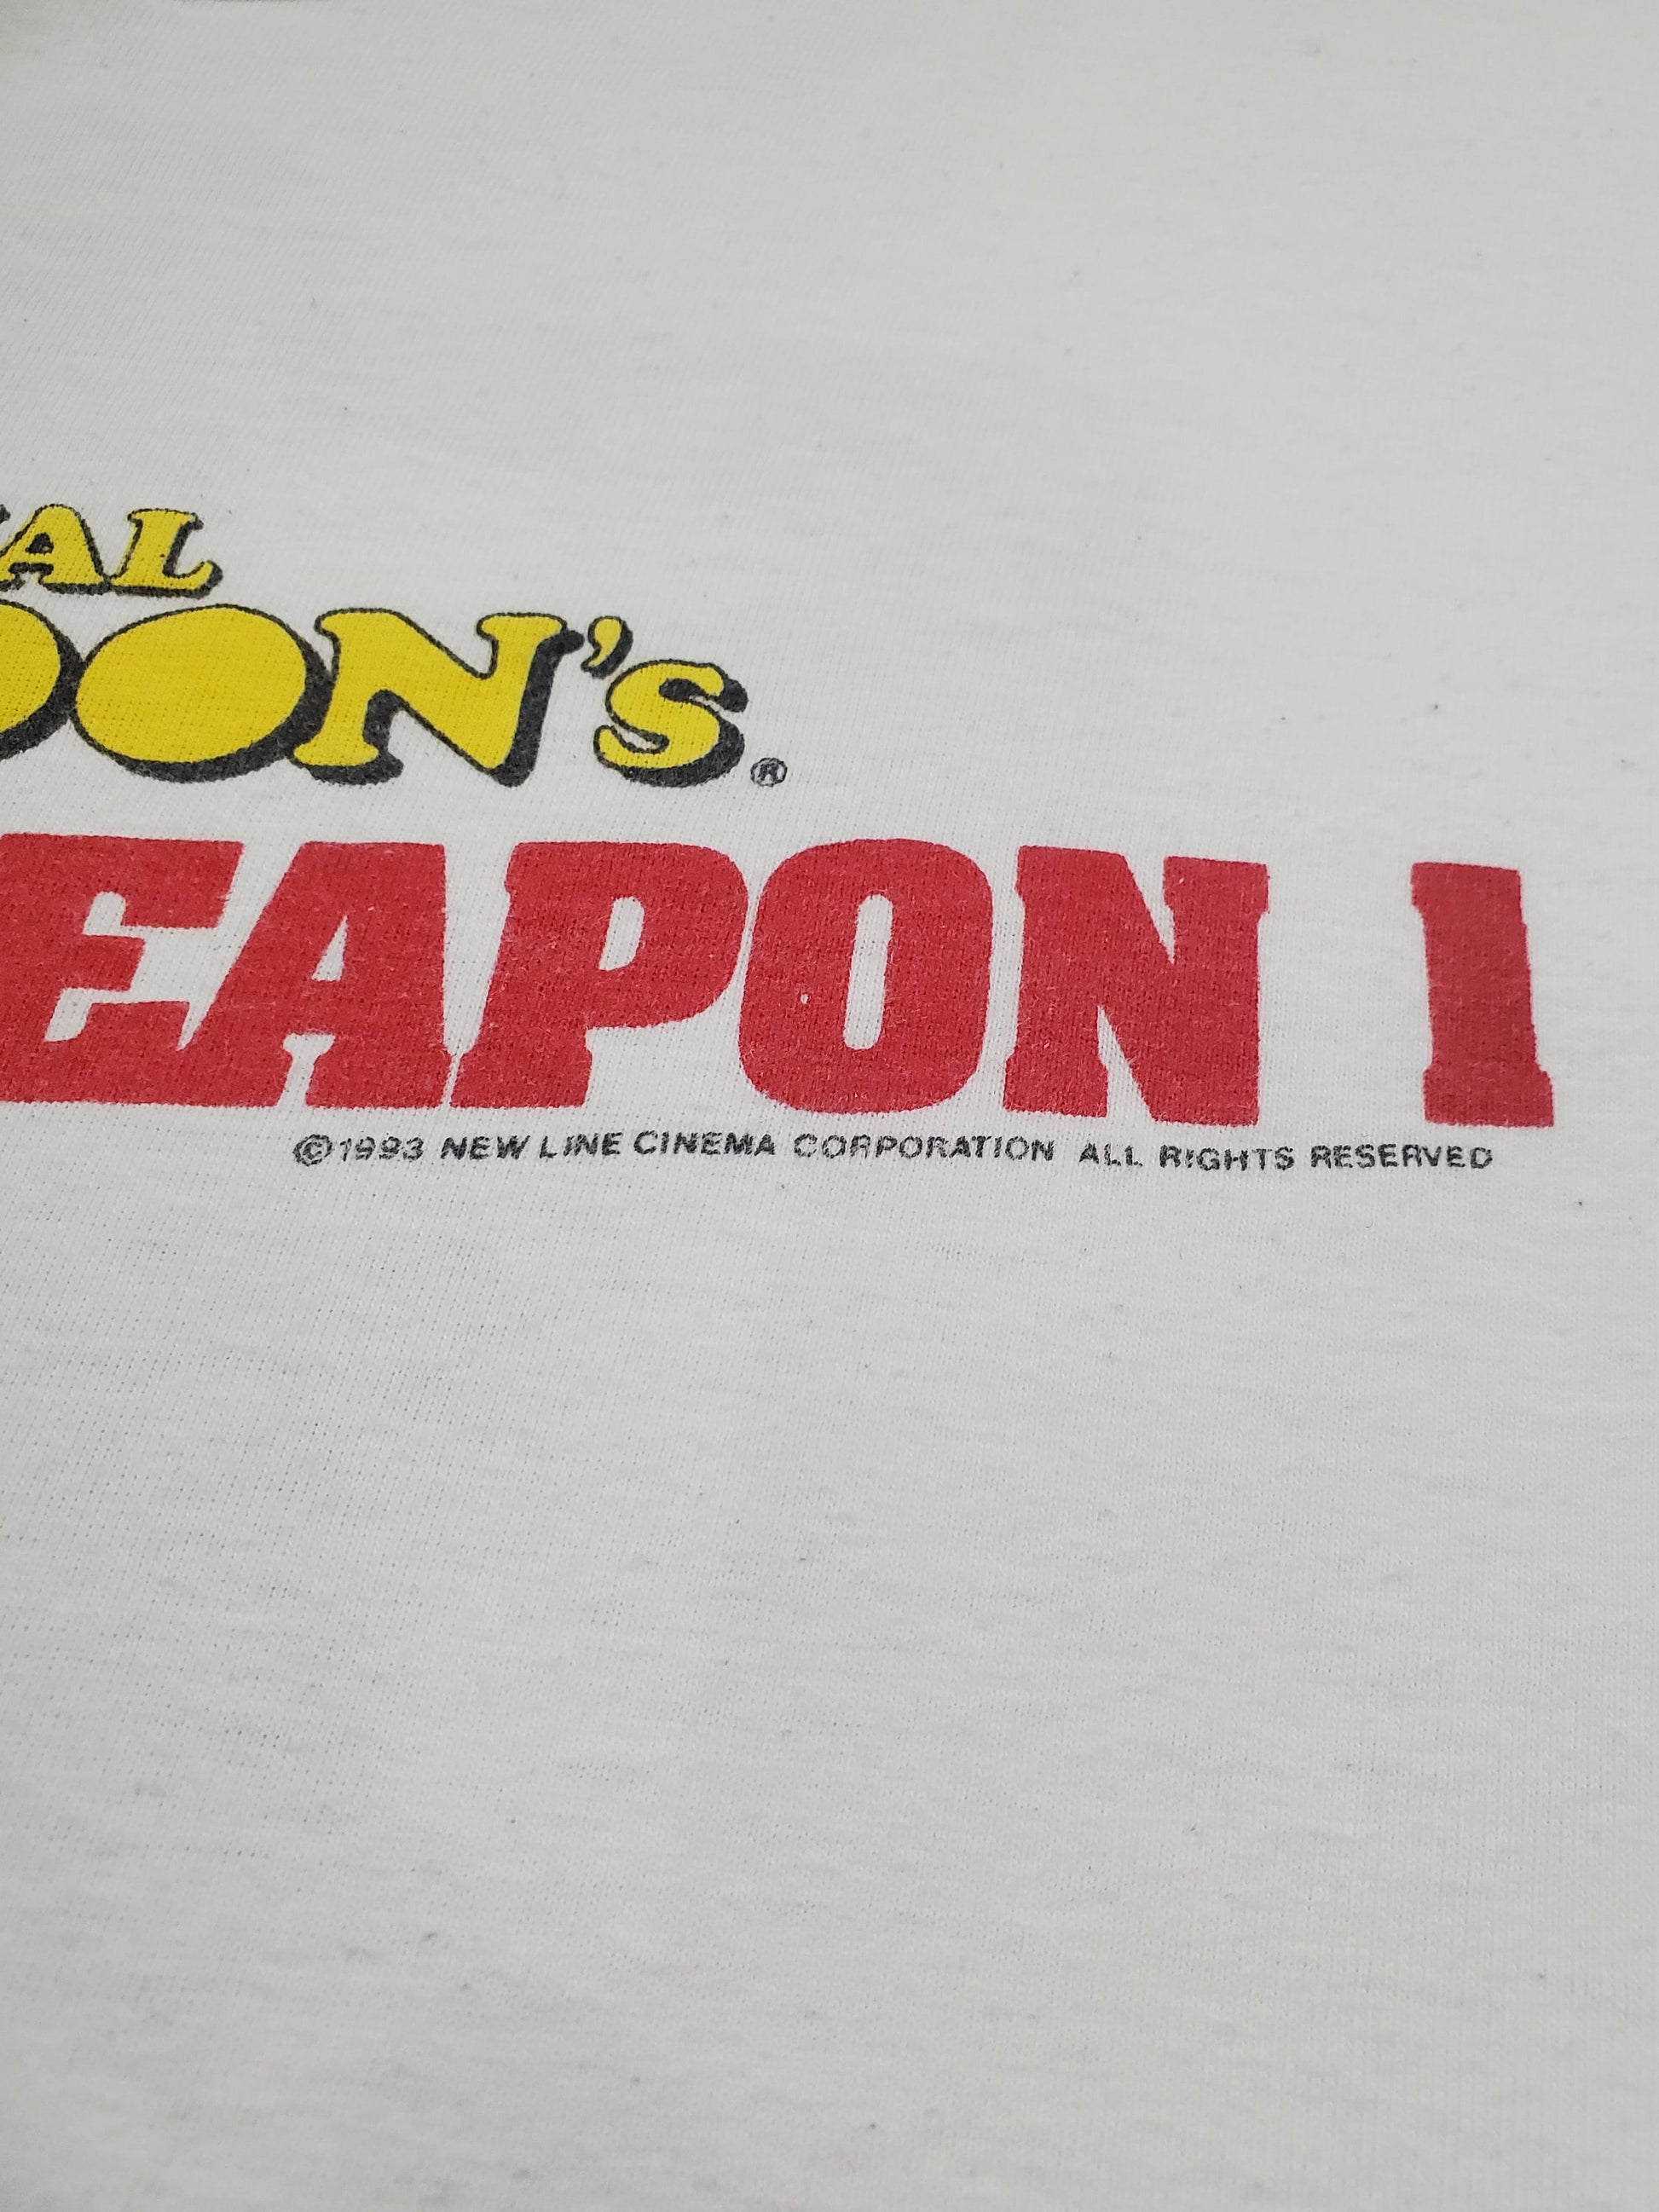 1990s 1993 National Lampoon's Loaded Weapon 1 Movie Promo T-Shirt Size XL